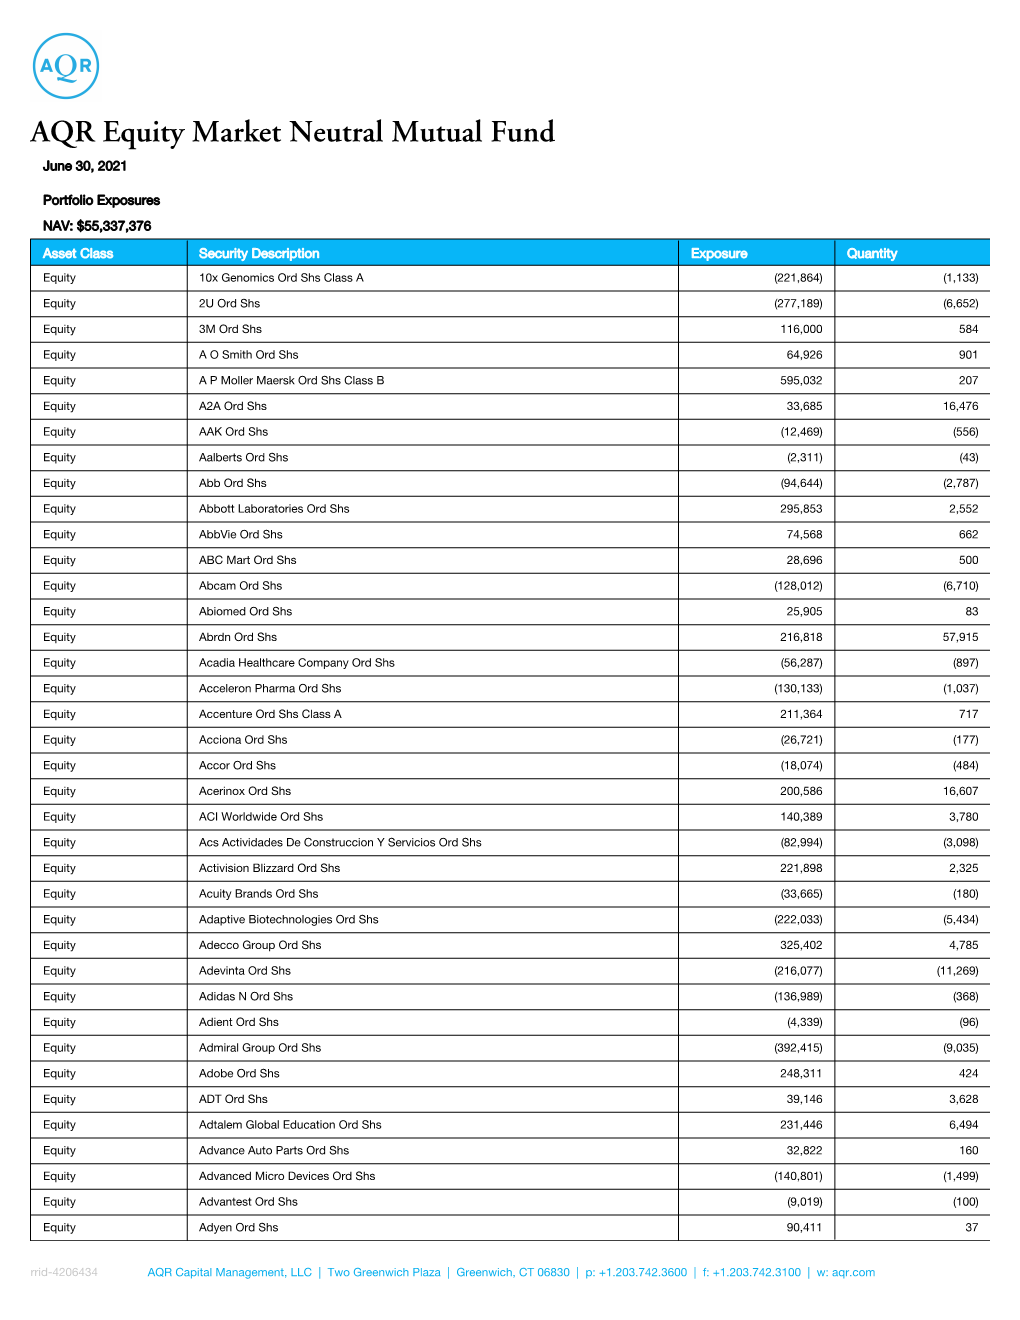 AQR Equity Market Neutral Mutual Fund June 30, 2021